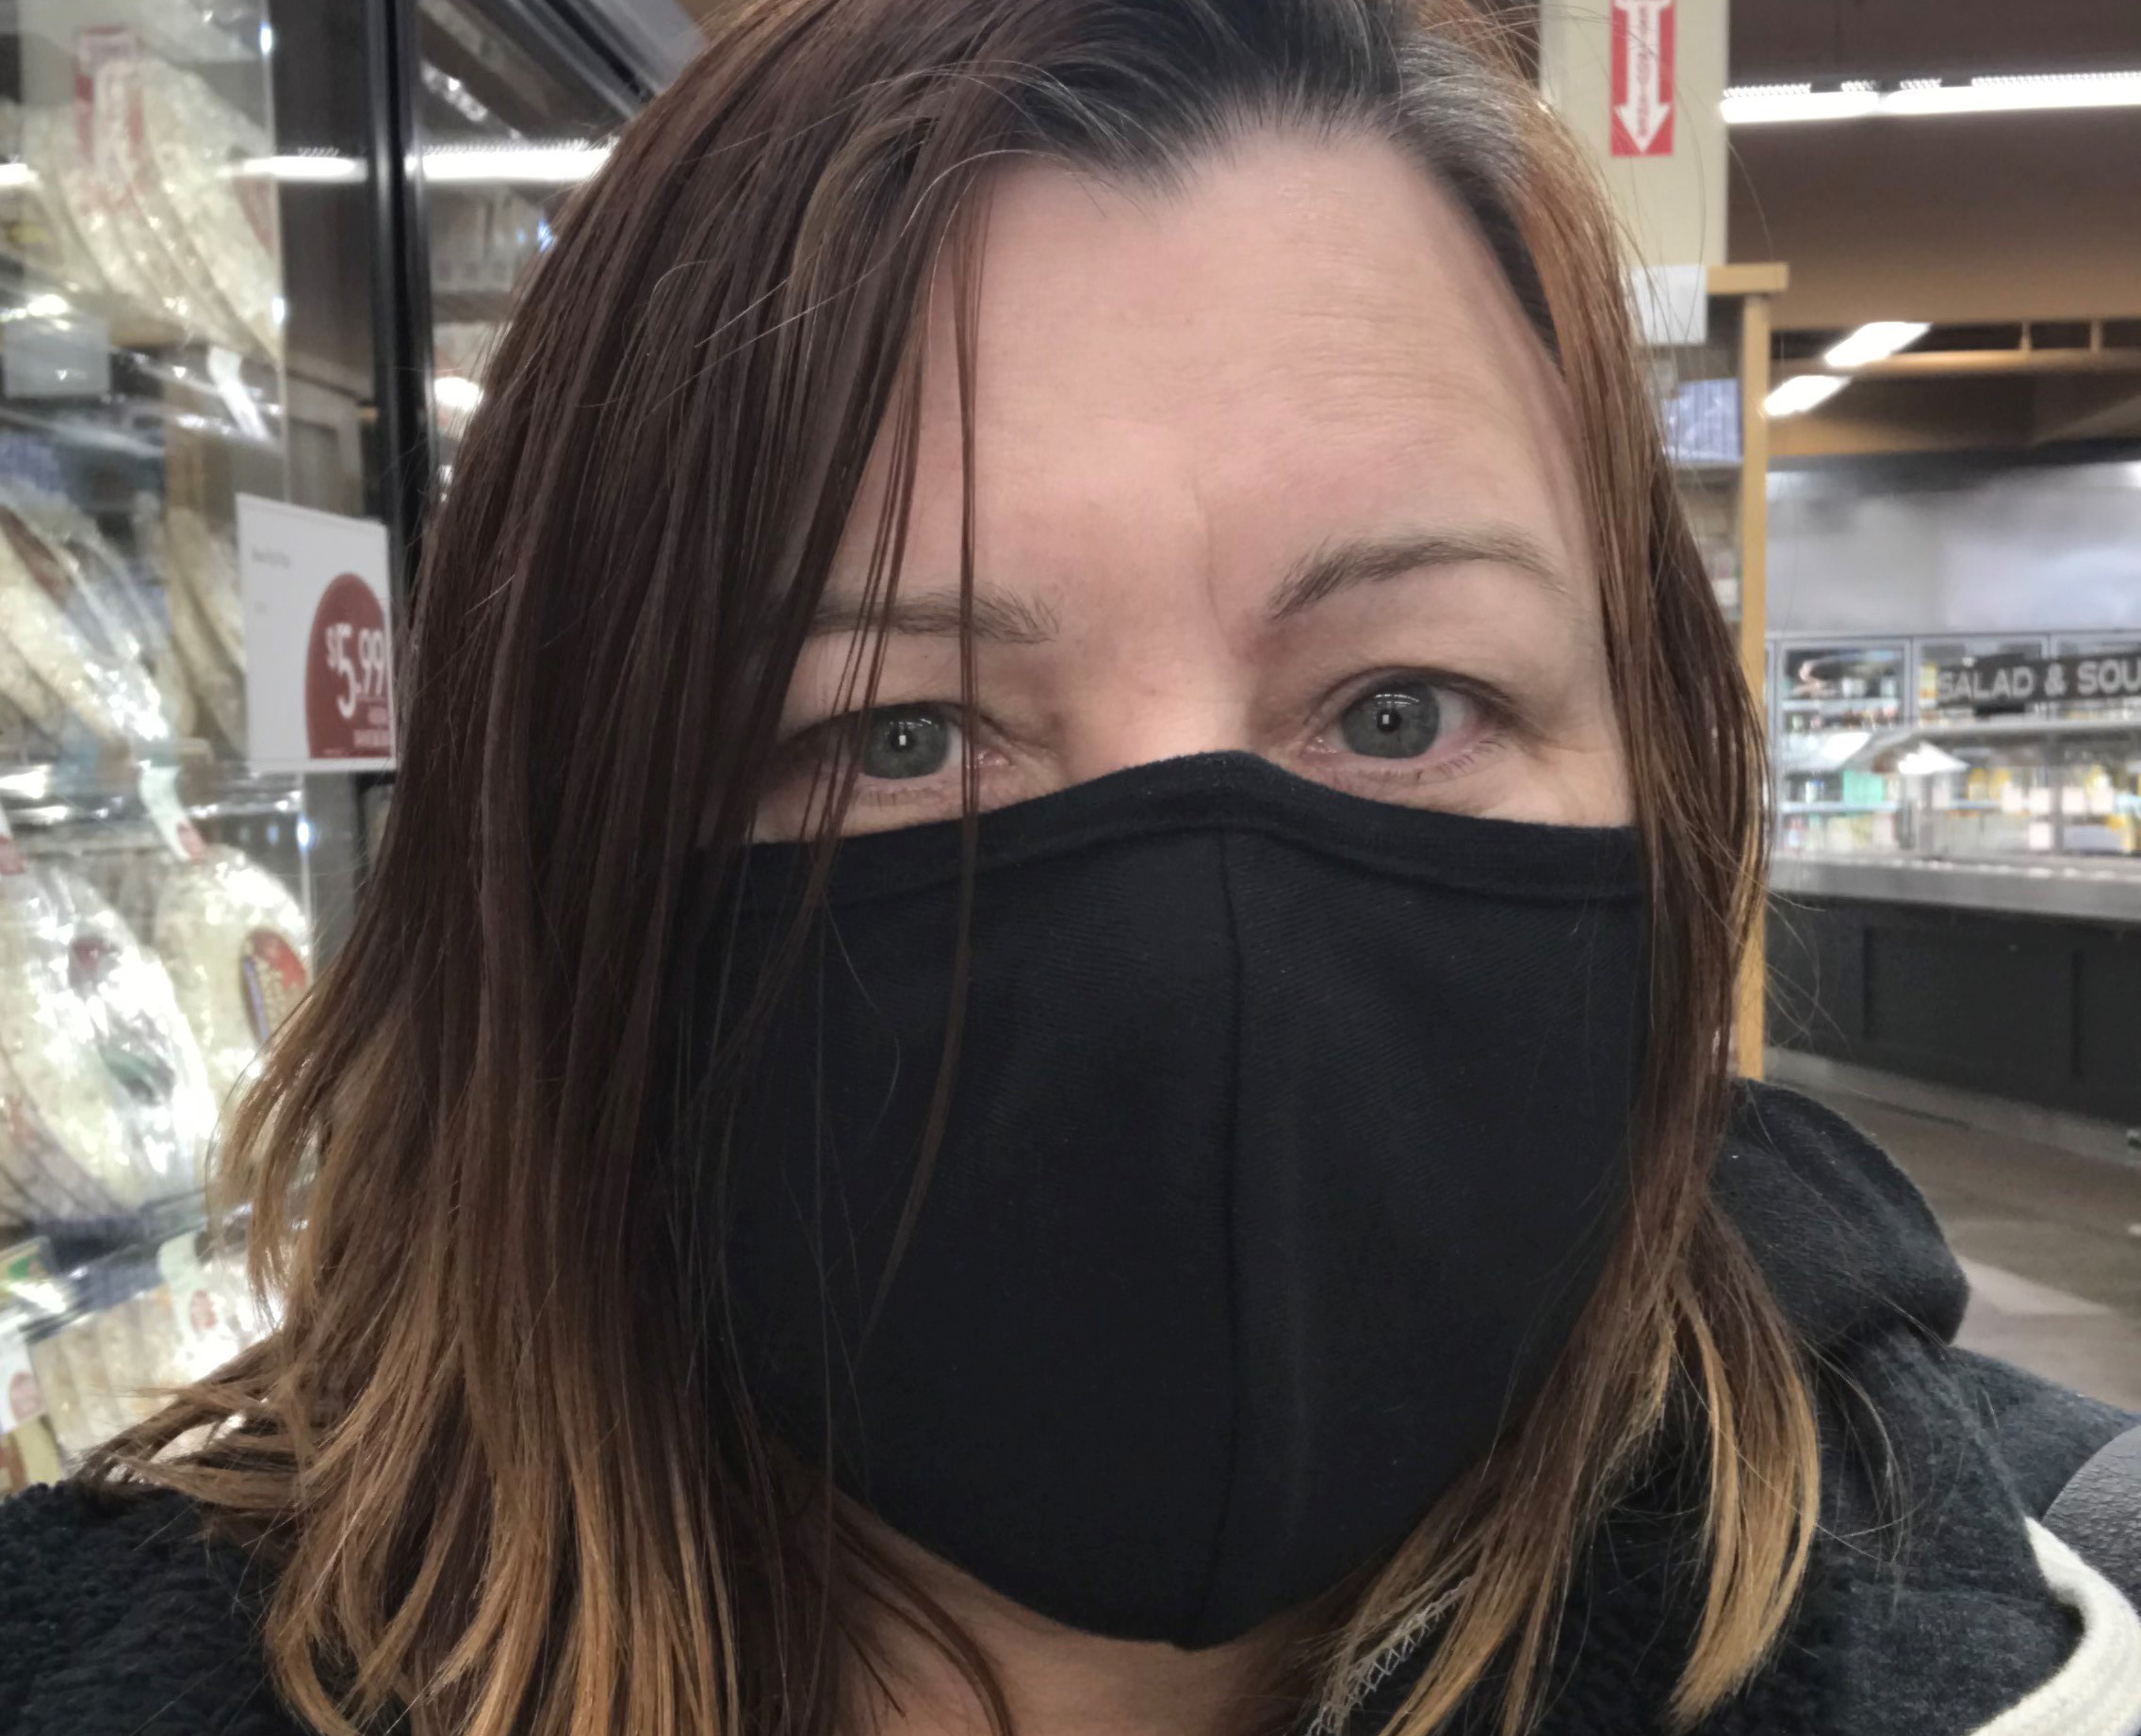 HERO employee Ariane Mistral shopping with a face mask